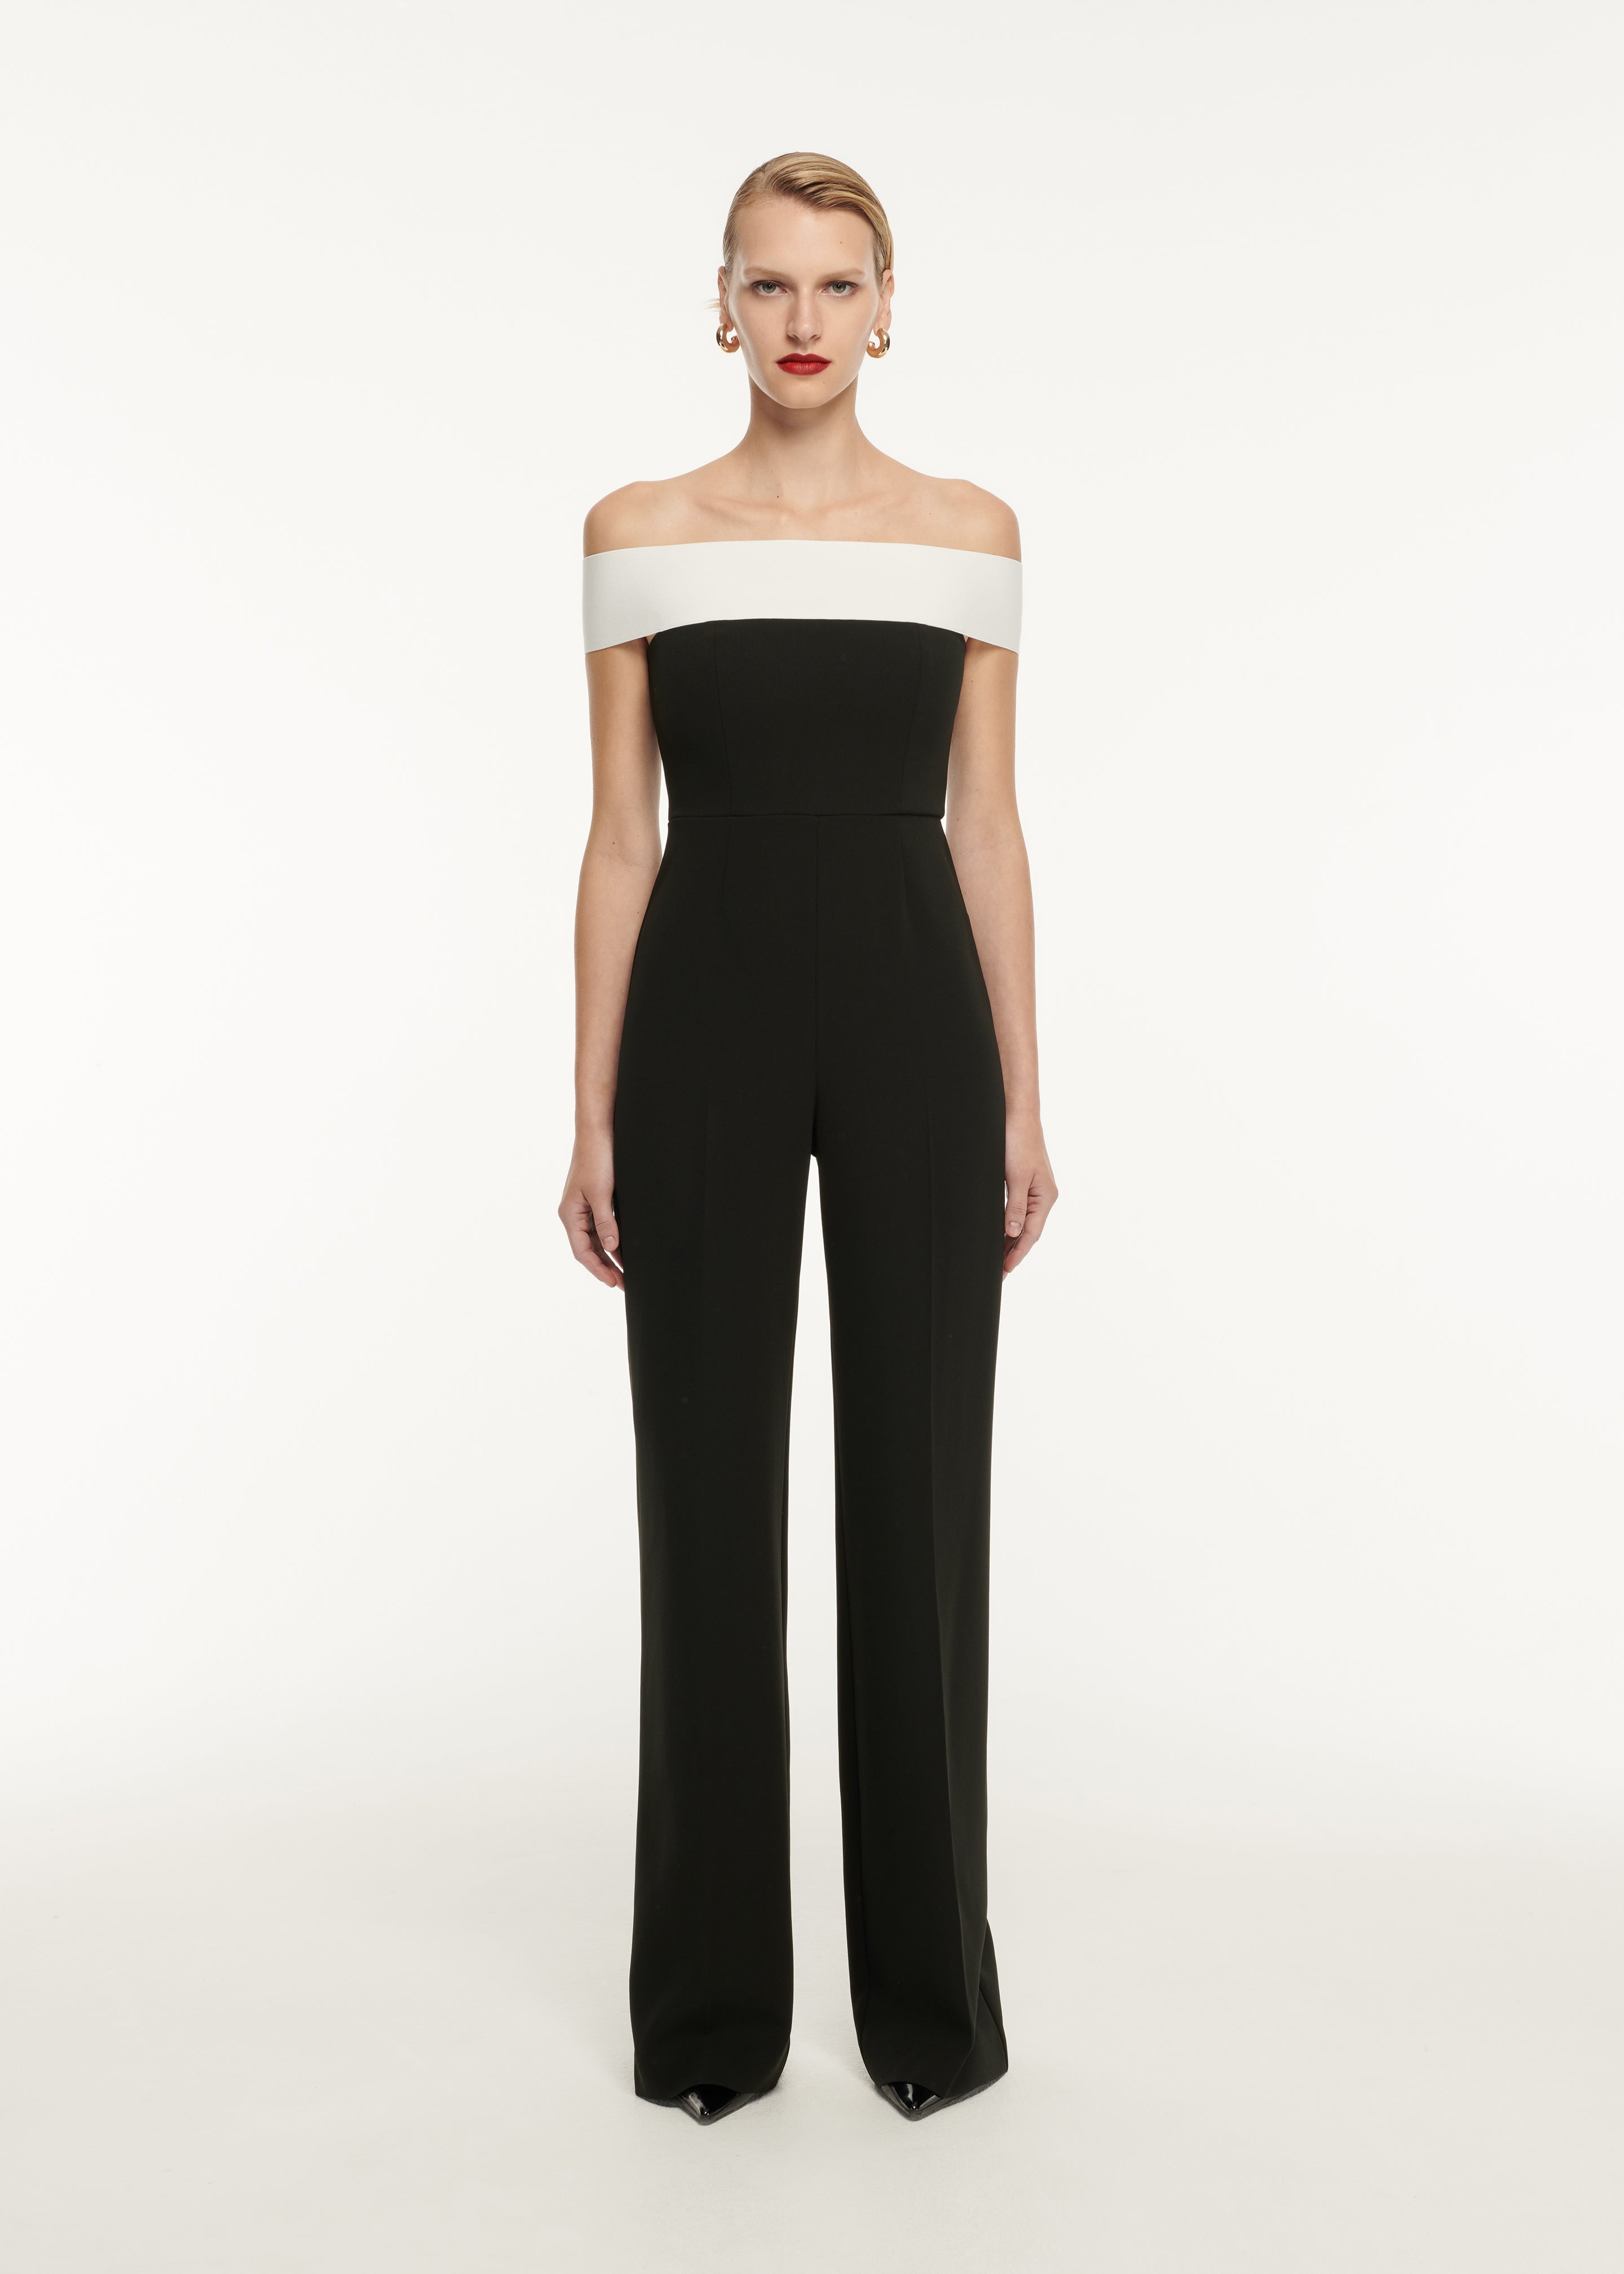 Aggregate more than 191 evening wear jumpsuits uk latest